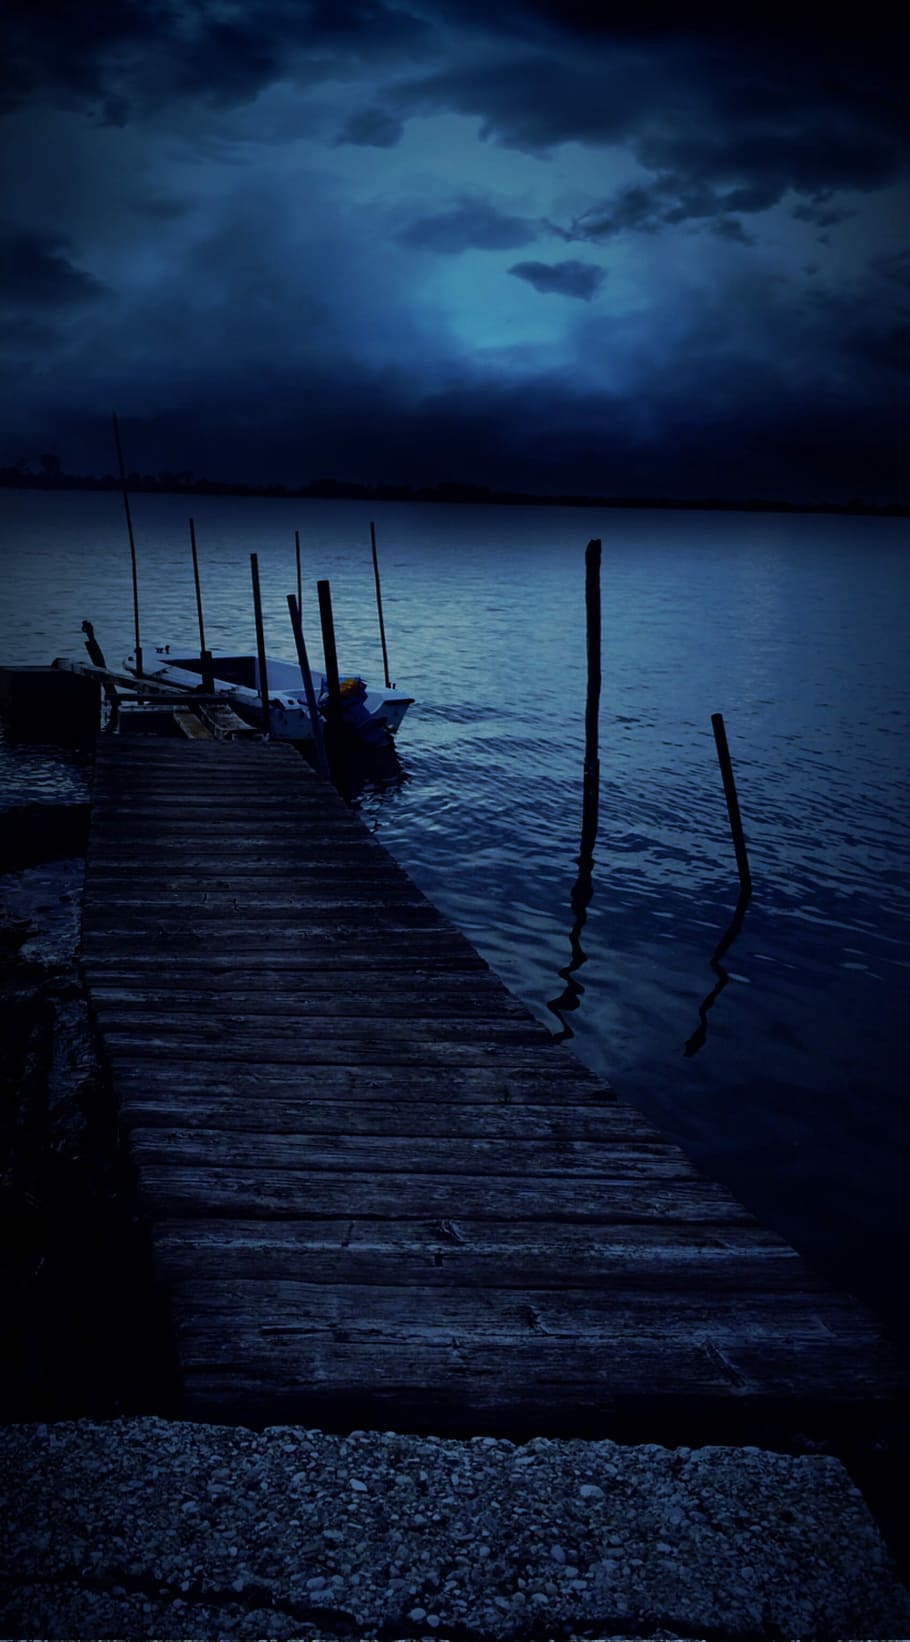 brown wooden dock with white motor boat on water at night time